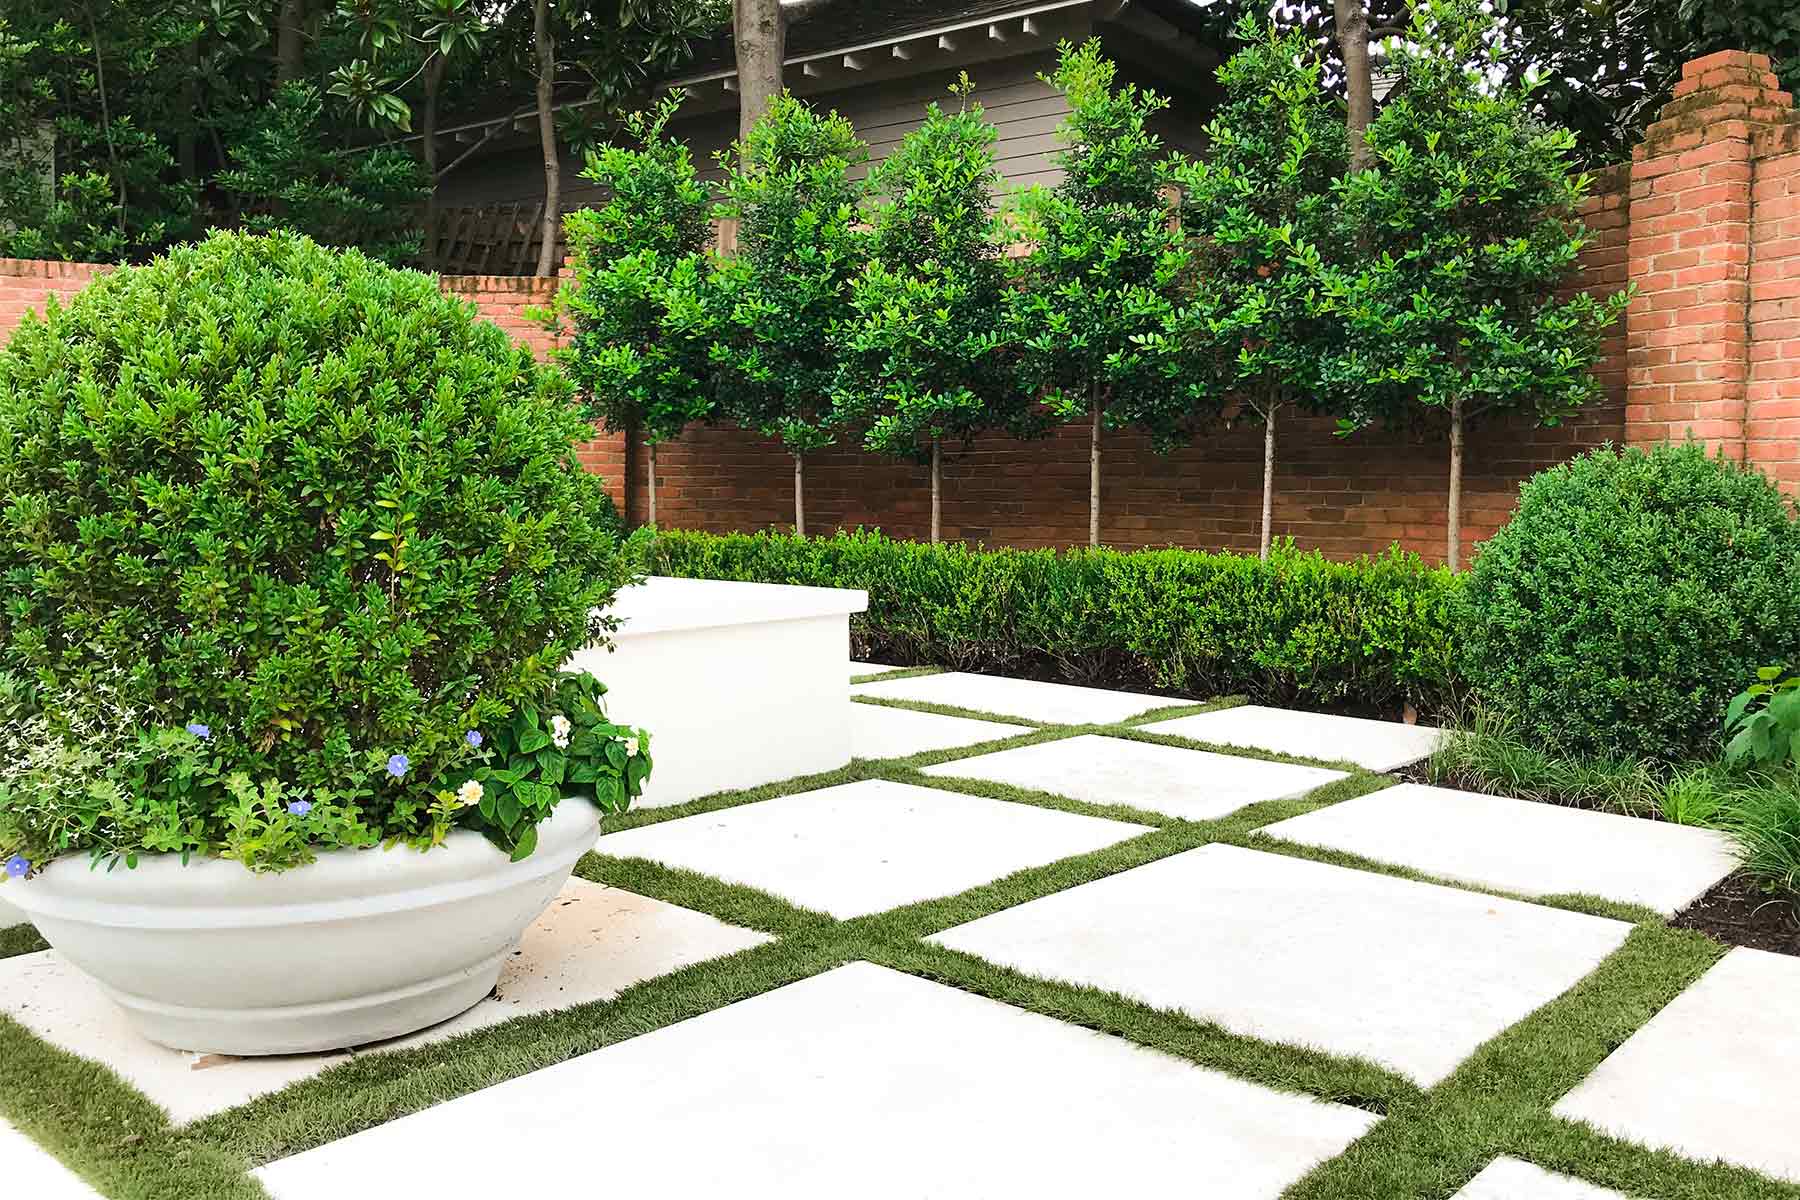 Available hardscape designs include grass block pavers